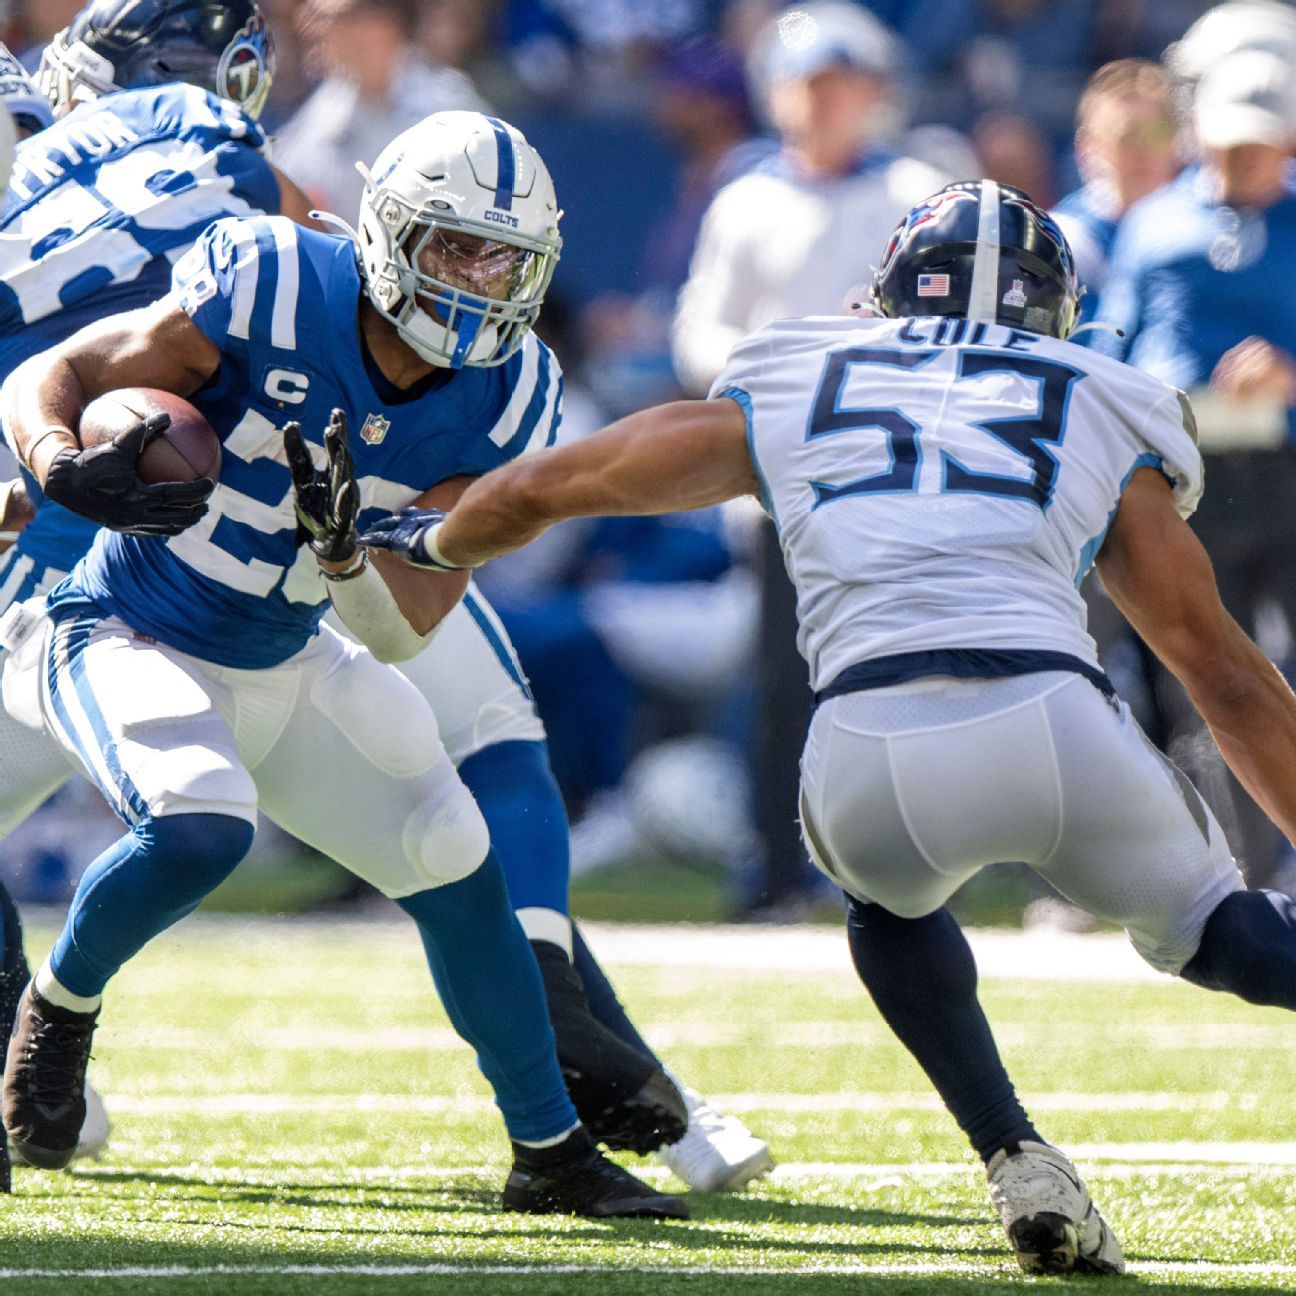 Indianapolis Colts RB Jonathan Taylor hopes to play Thursday night despite ankle injury